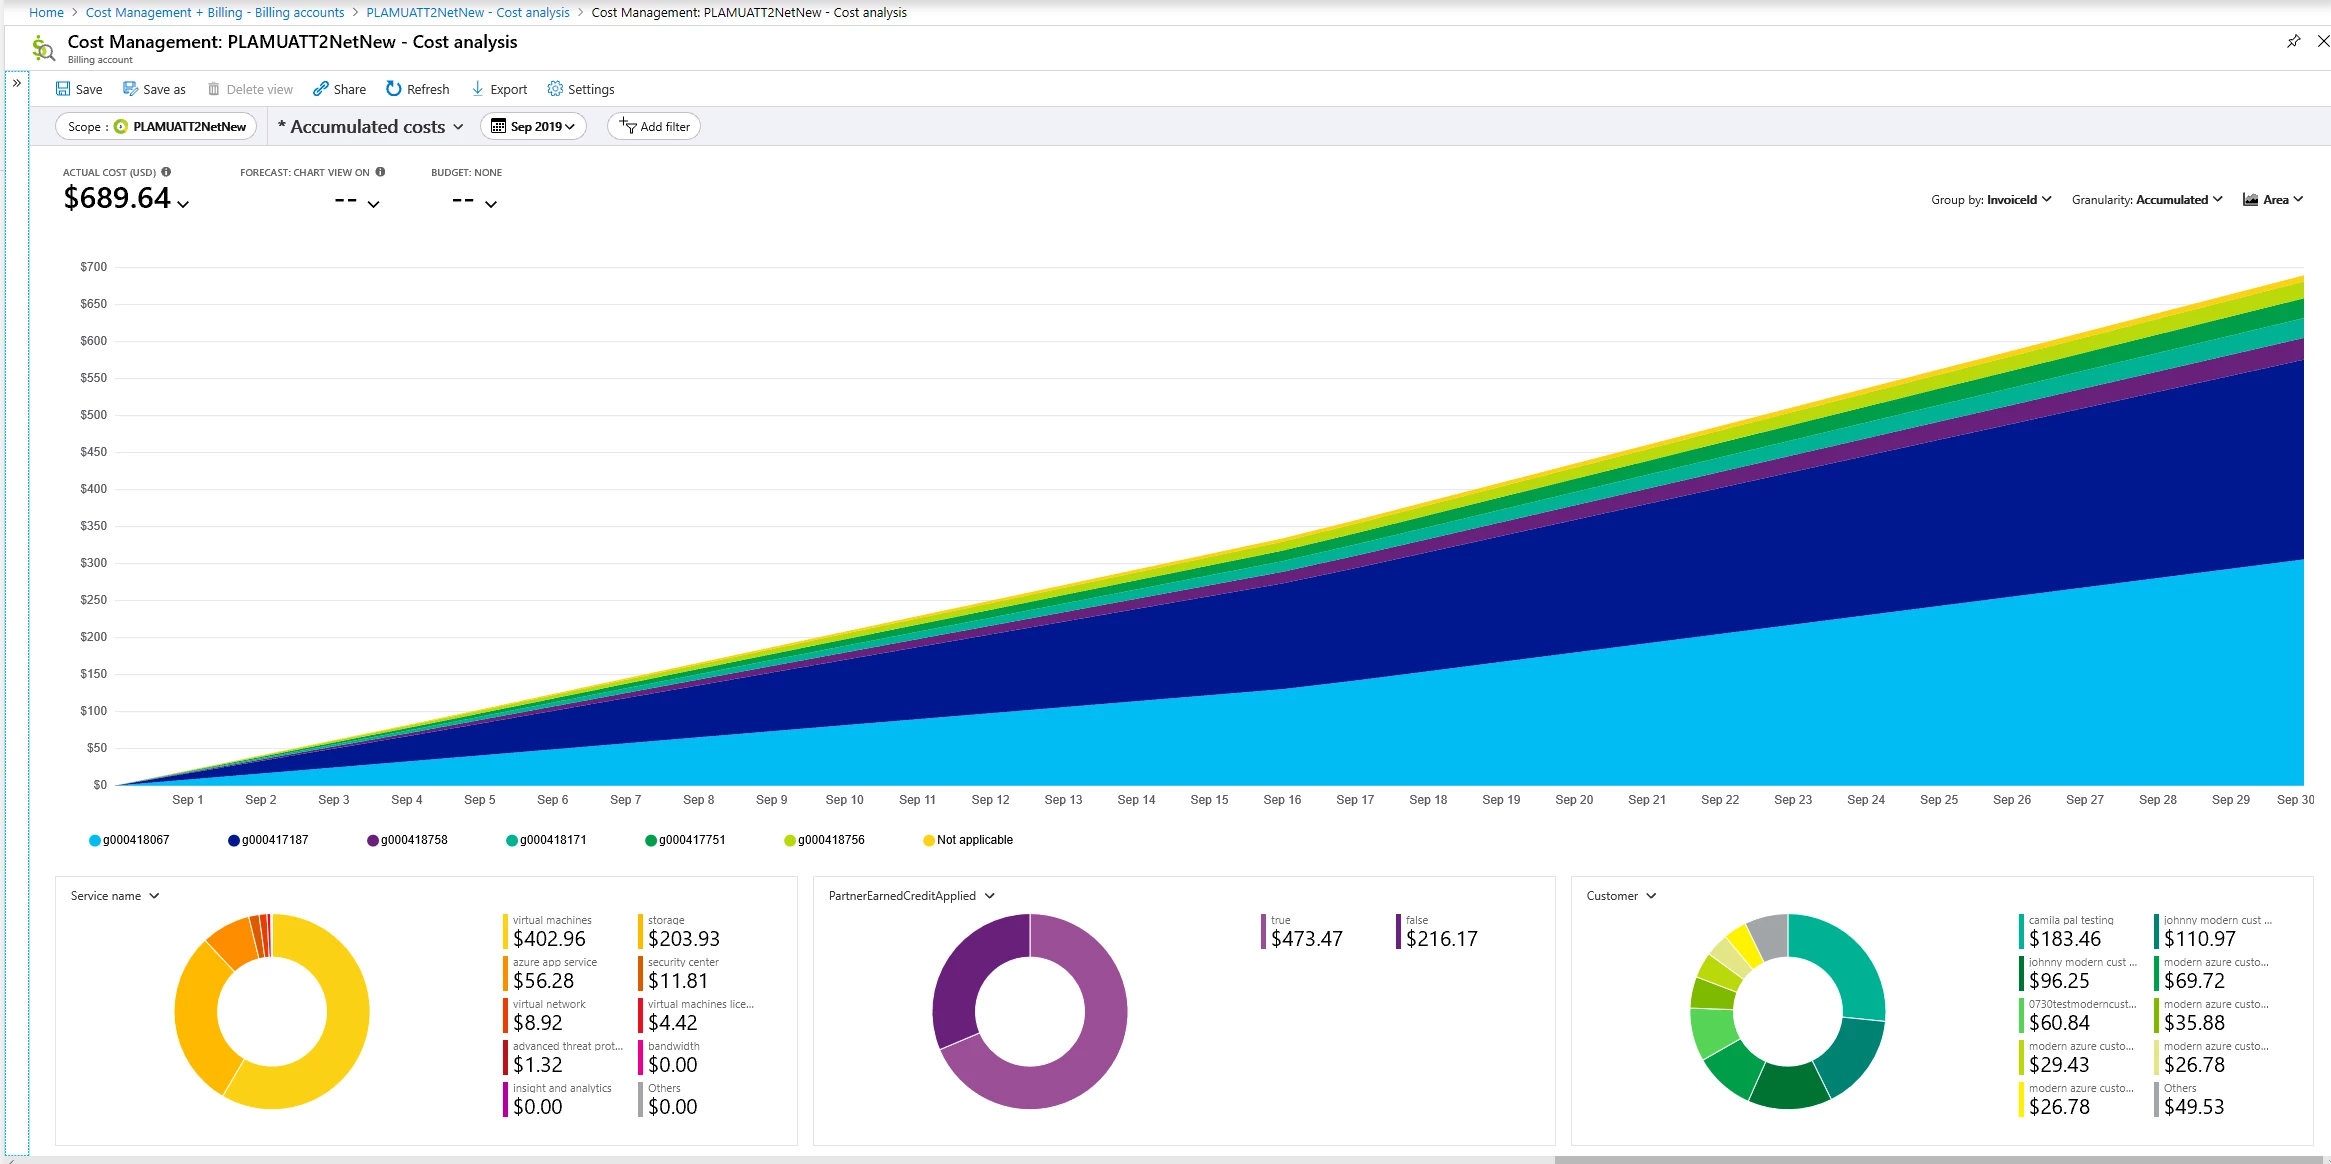 An image showing how cost analysis can help analyze Azure spend to reconcile cost.